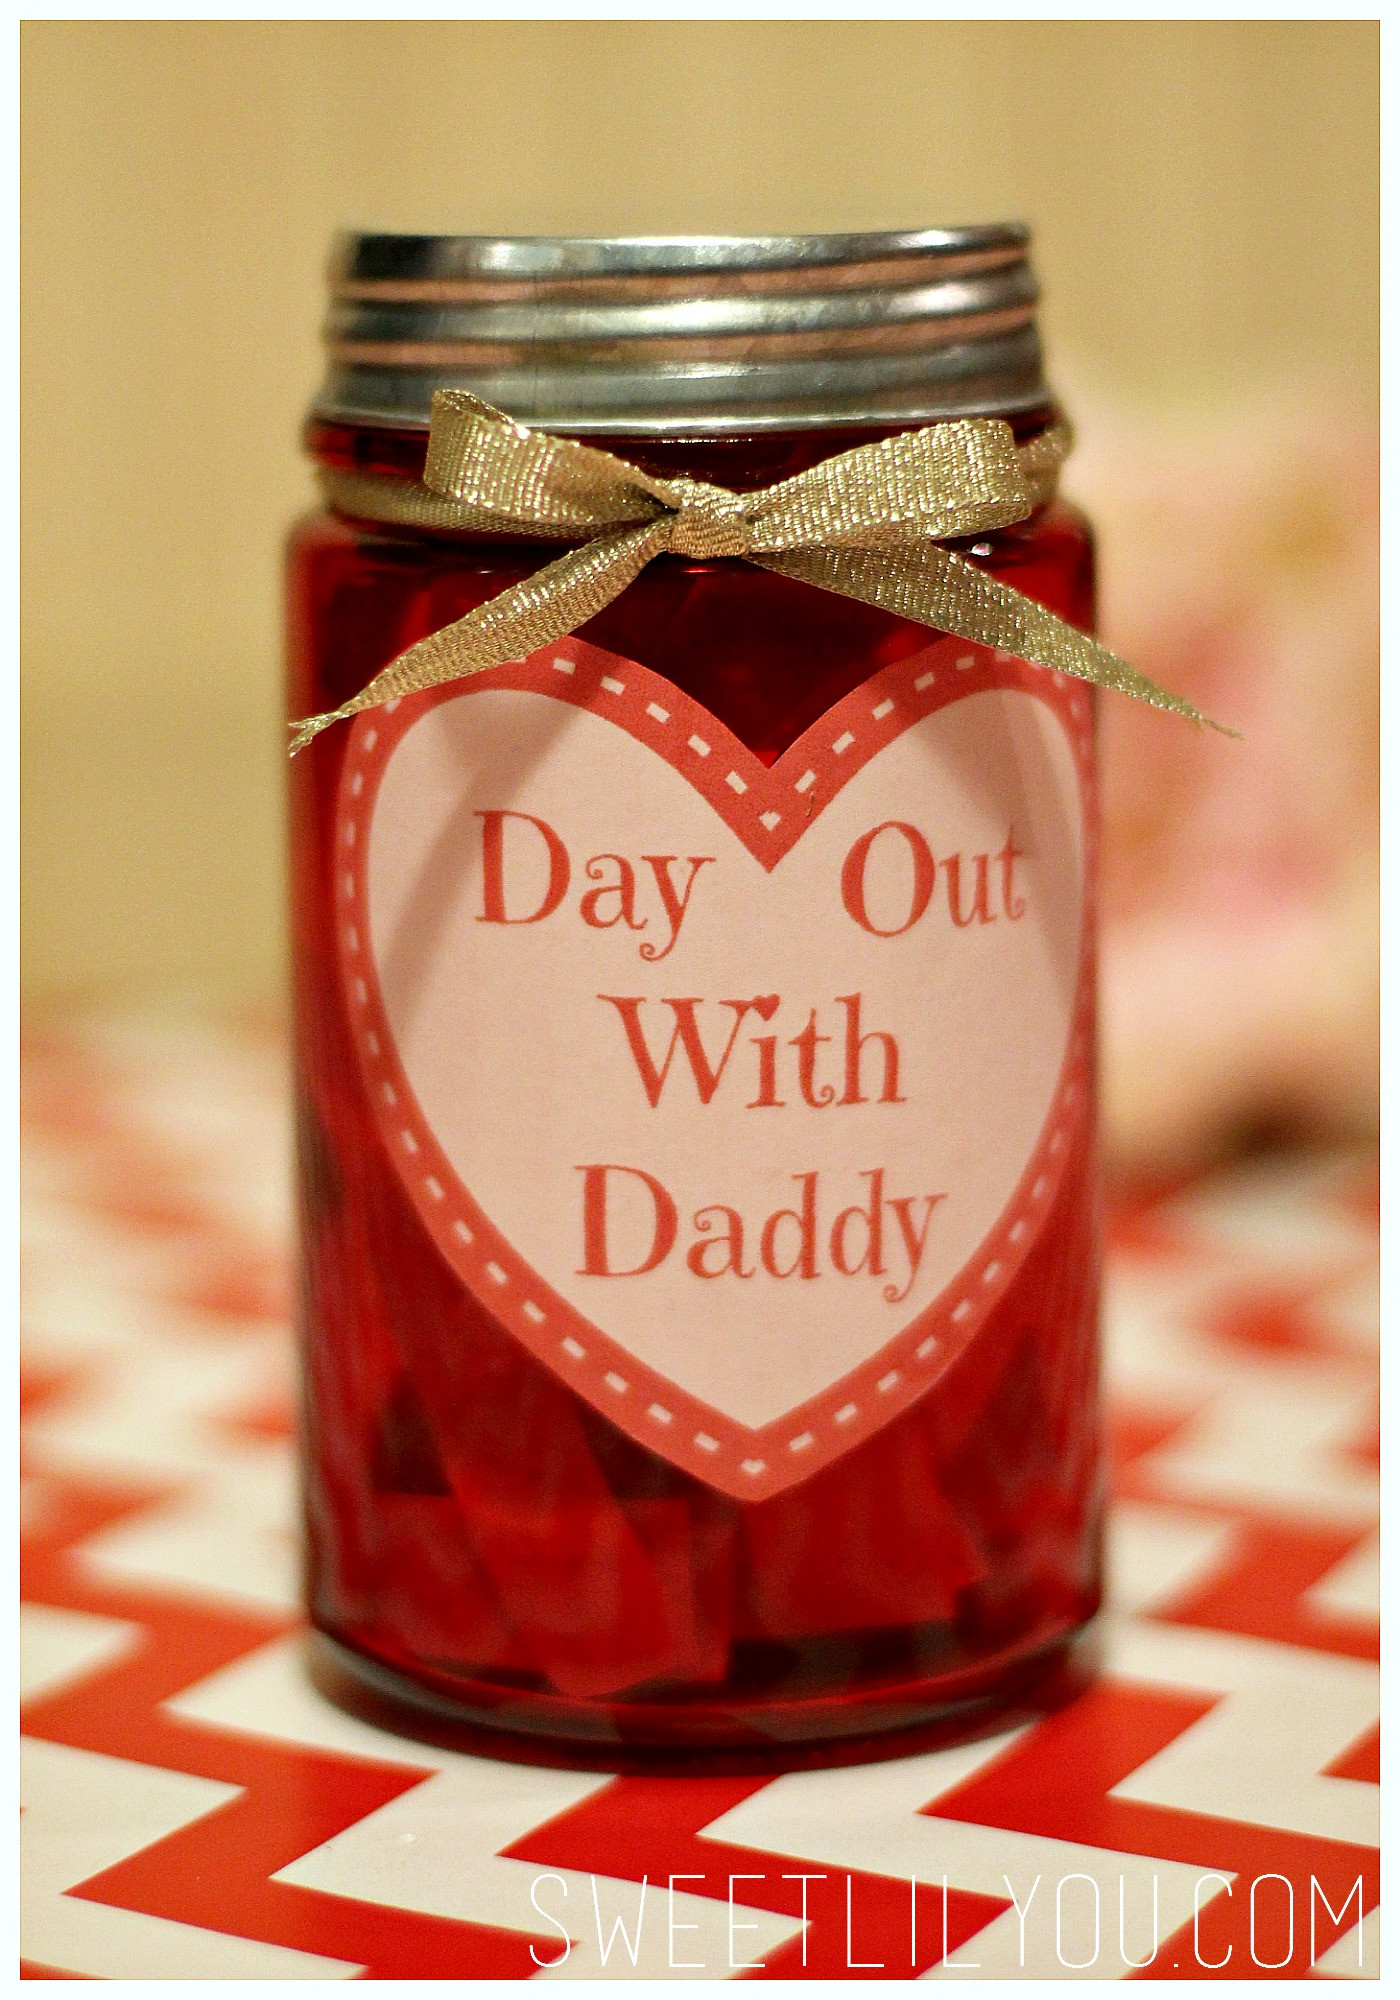 Valentine Gift Ideas For Daddy
 Day Out With Daddy Jar Valentine s Day Gift for Dad